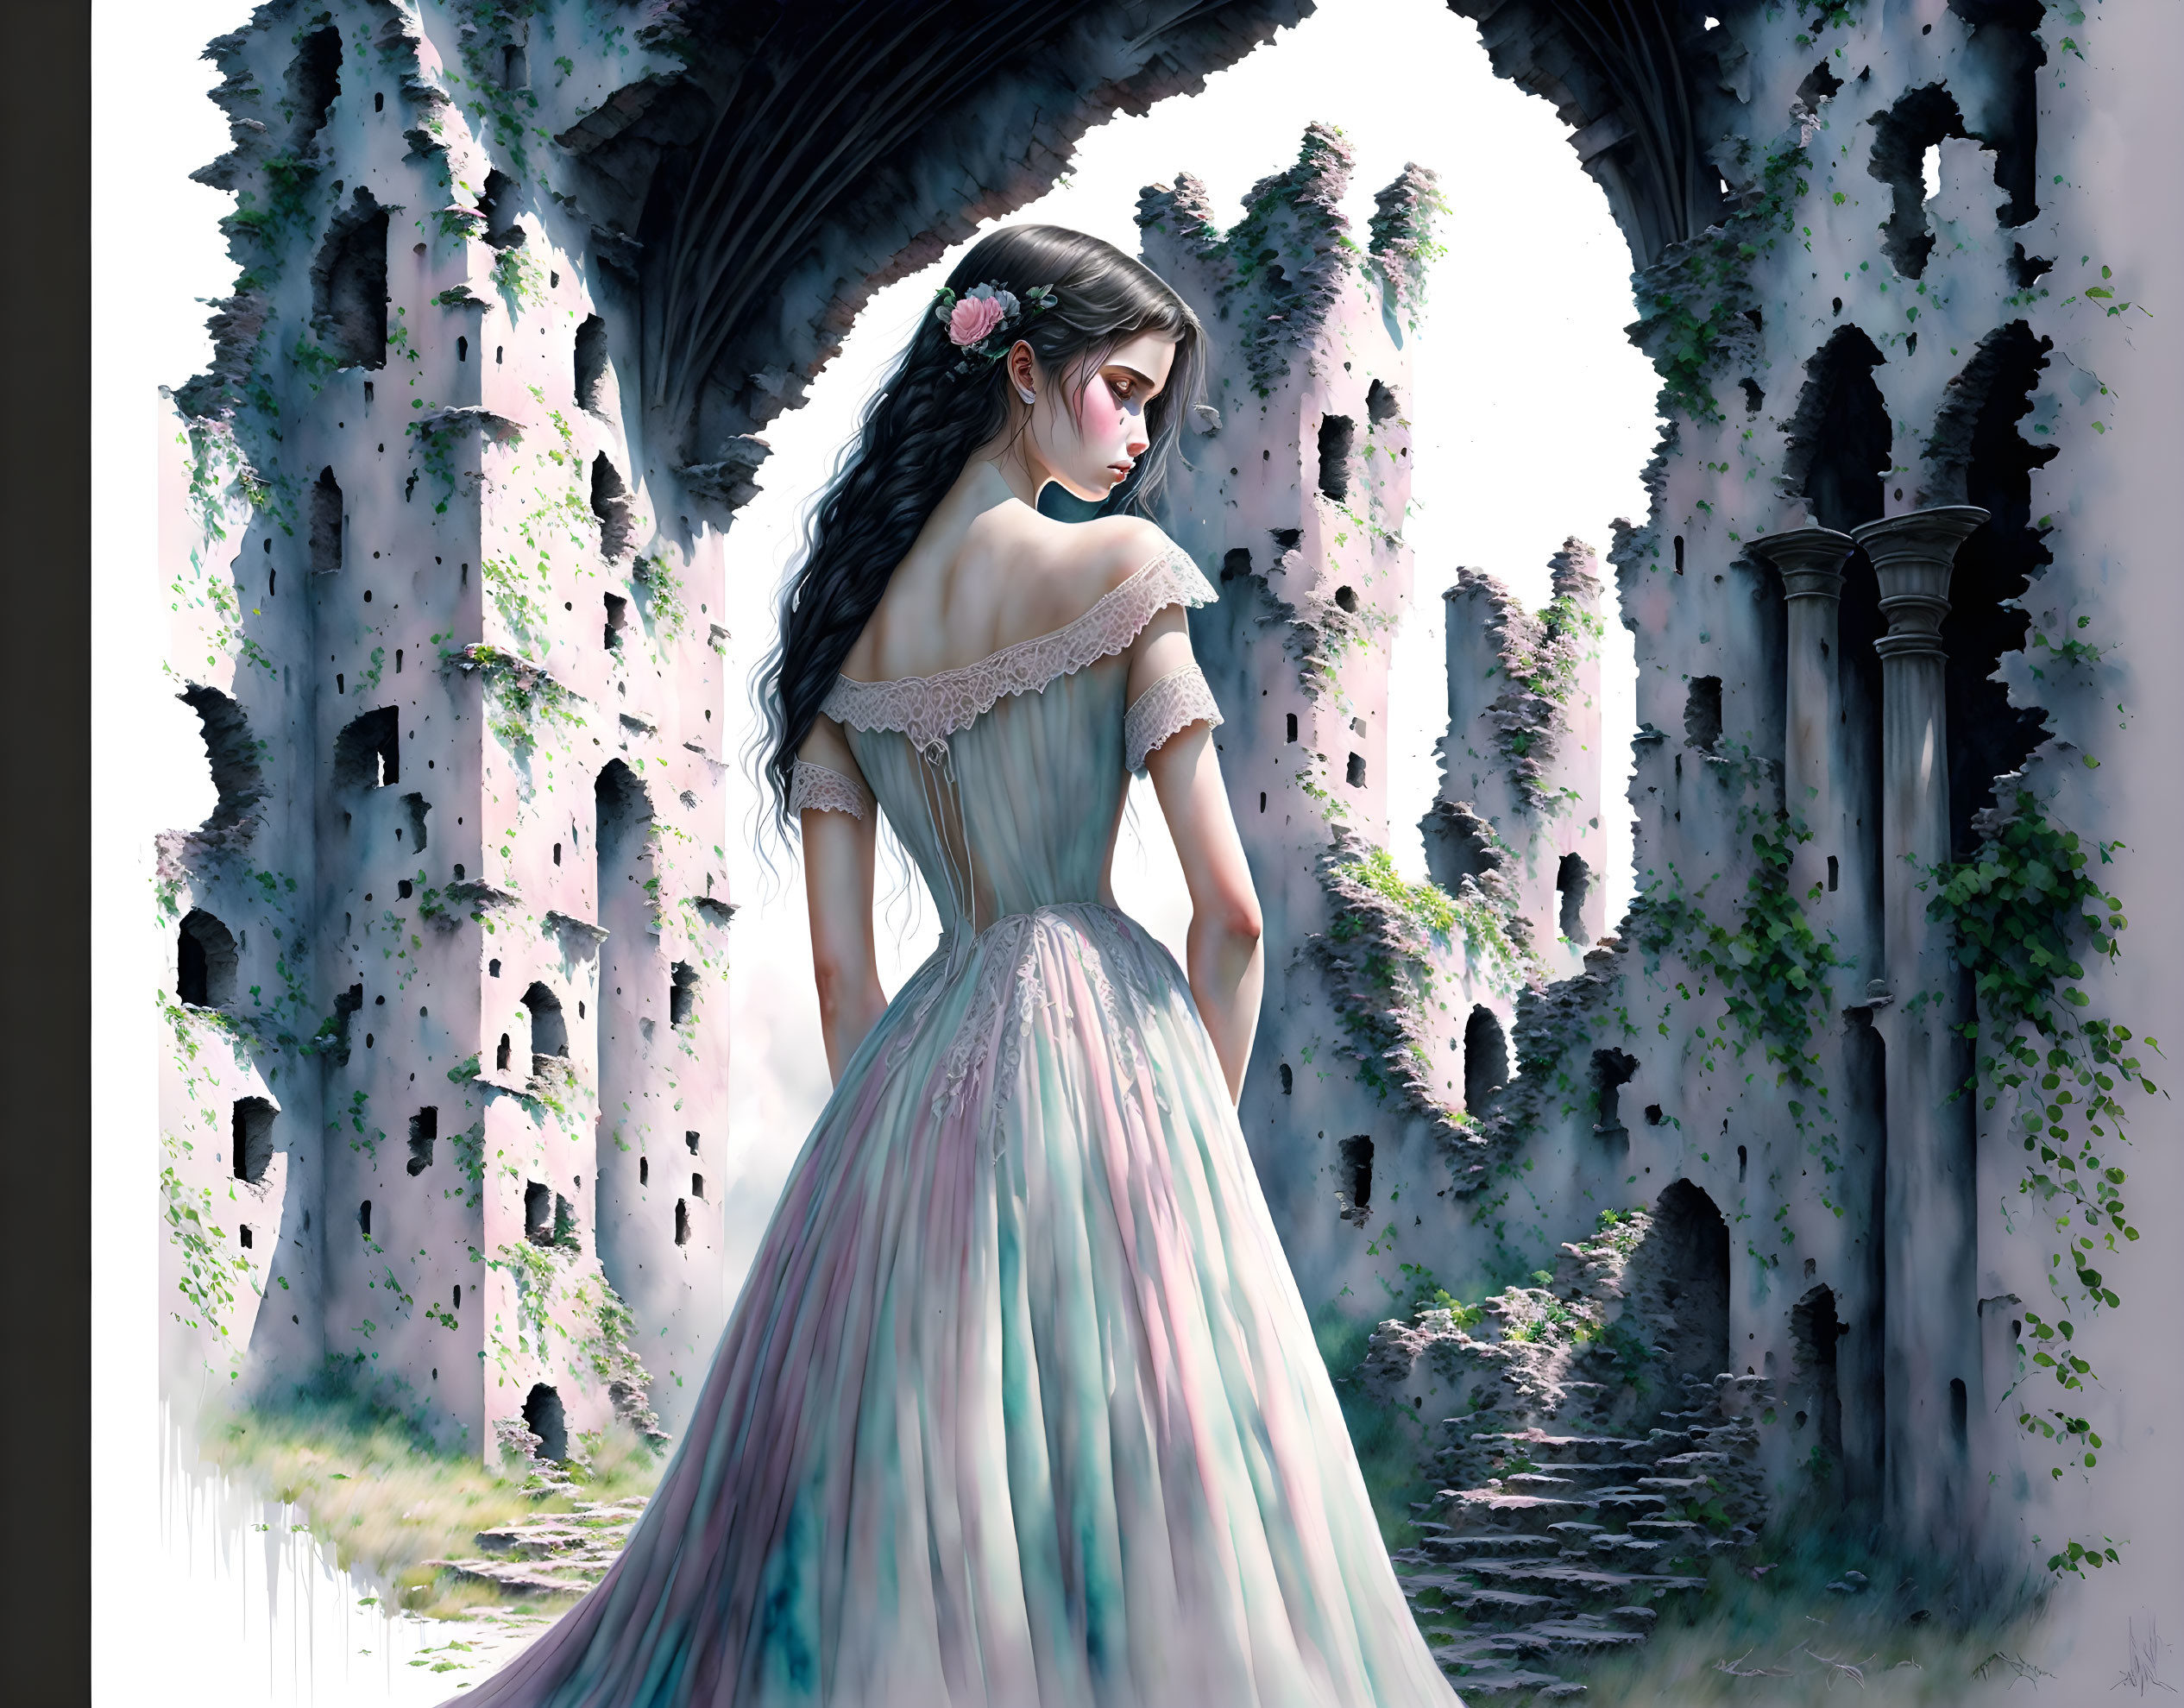 Woman in flowing pastel dress among ruins with sunlight and greenery.